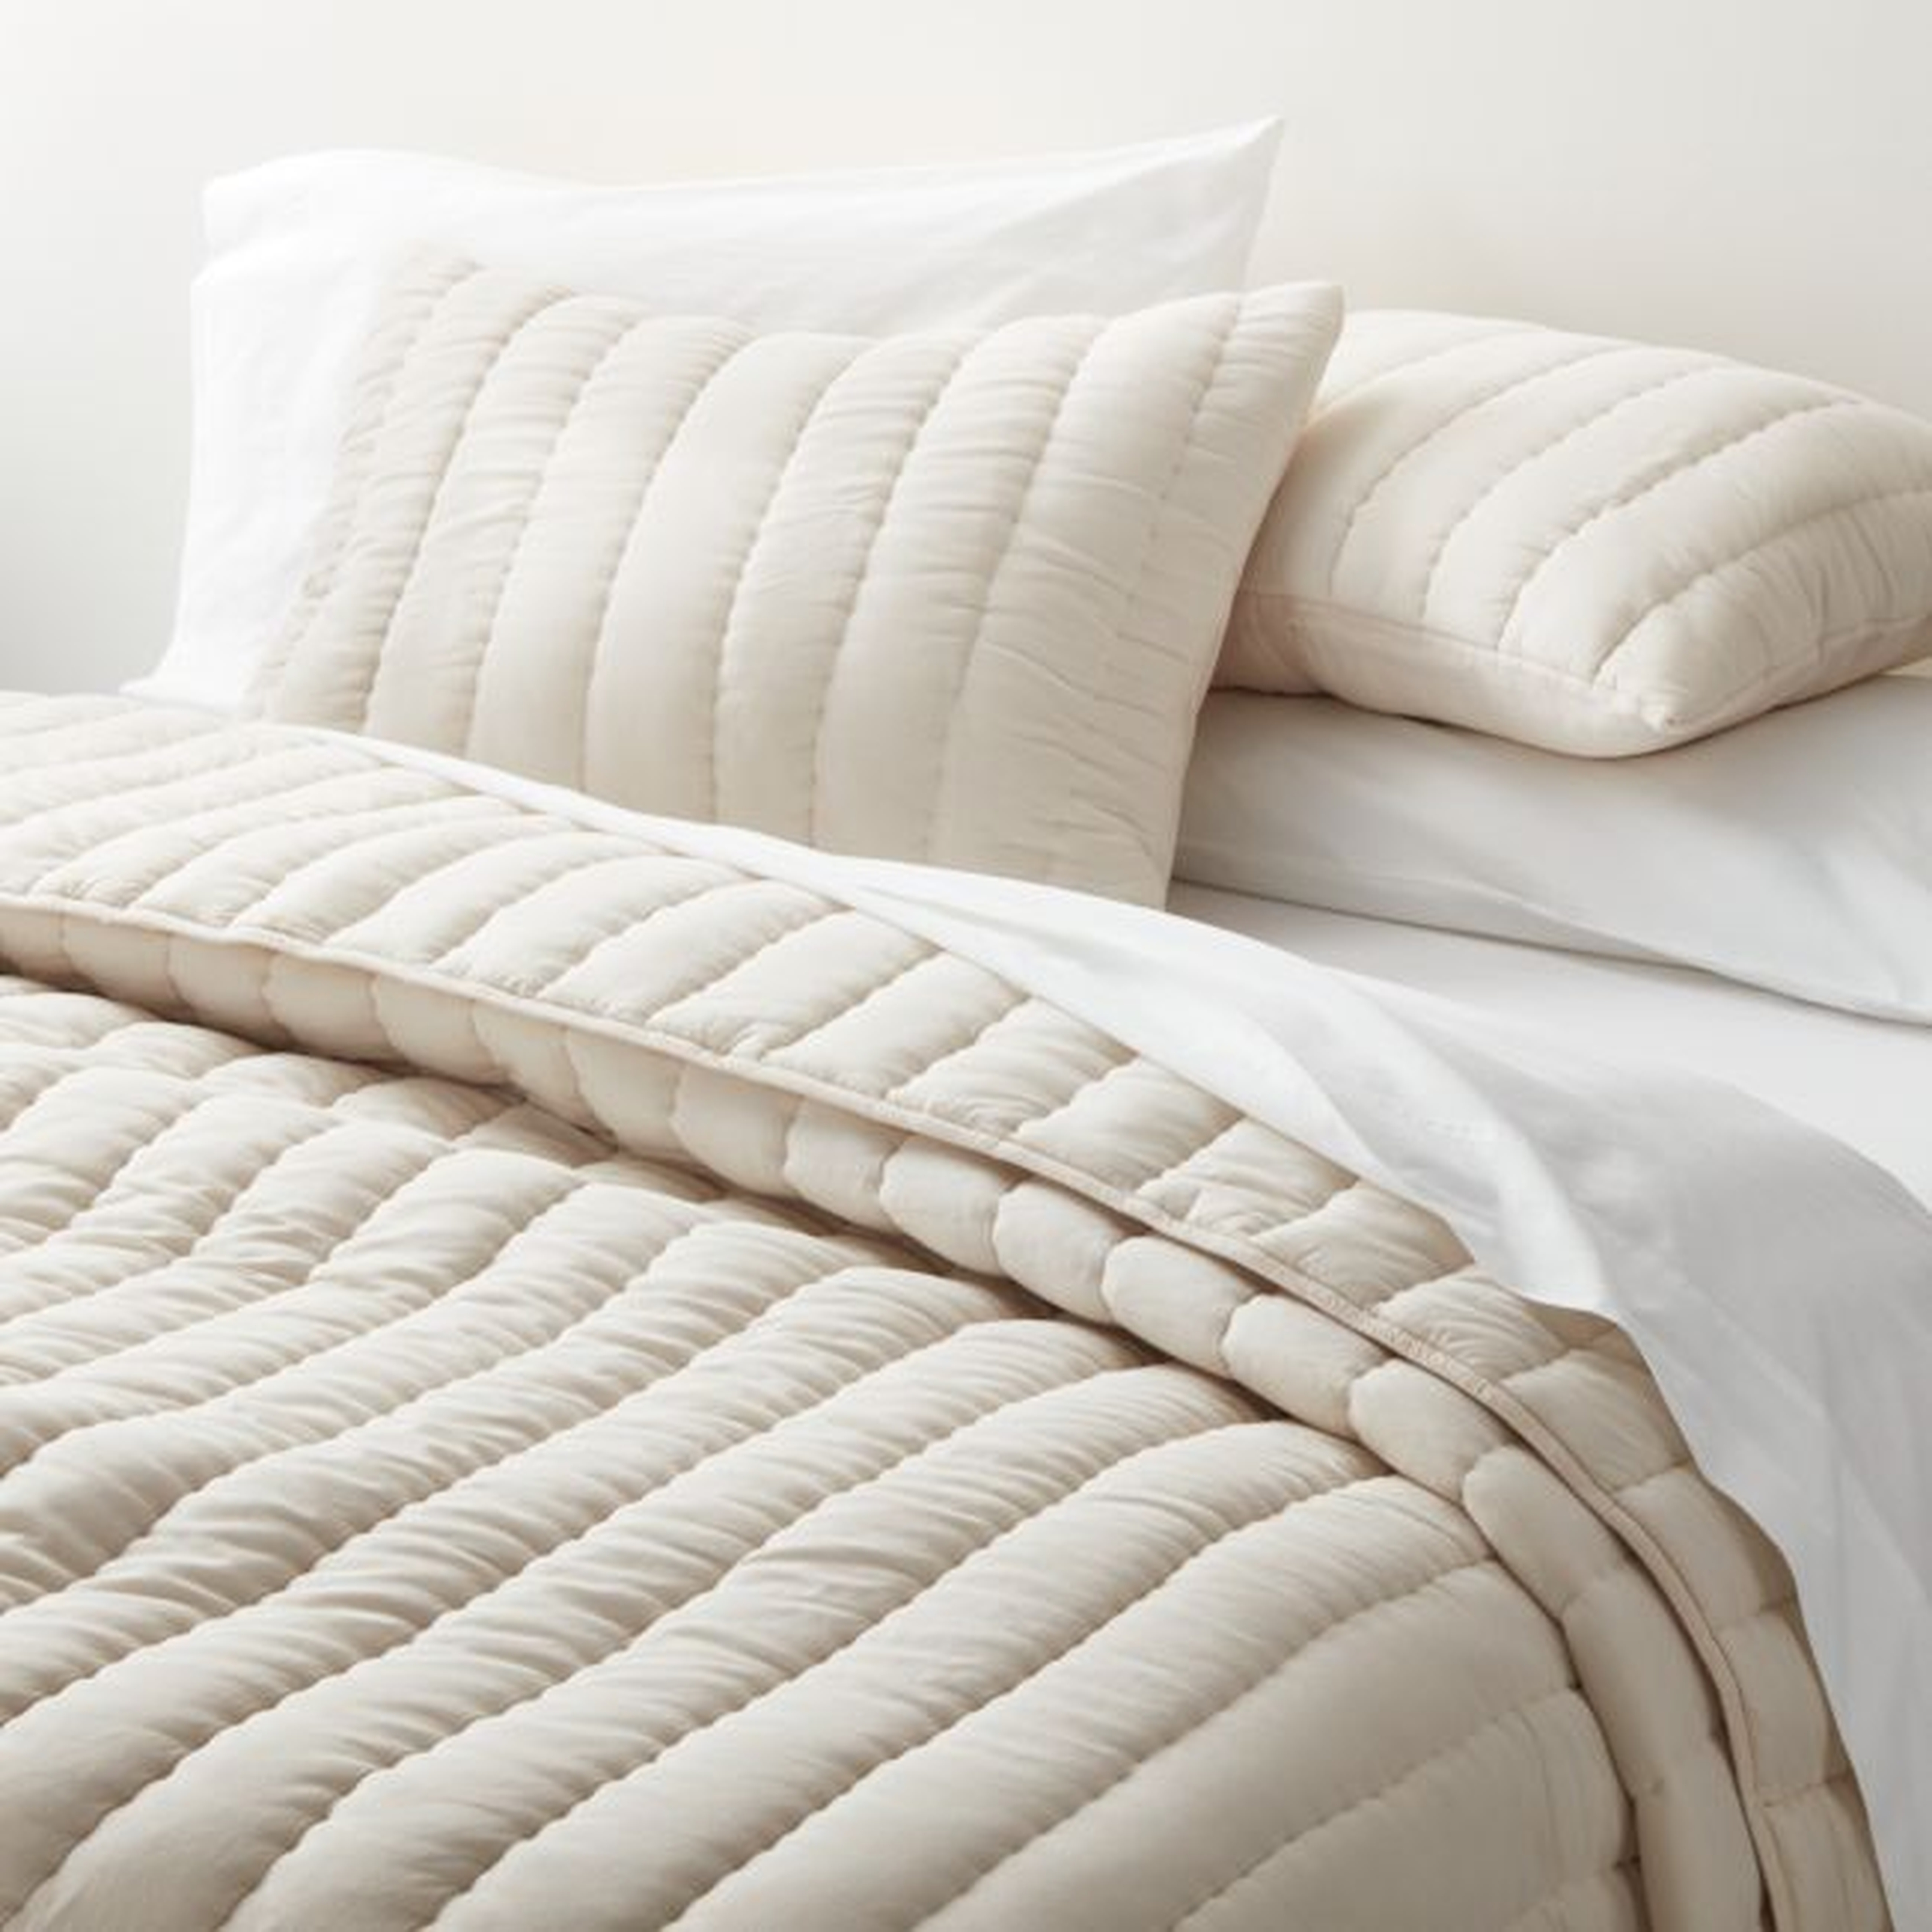 Olney Cream King Quilt - Crate and Barrel